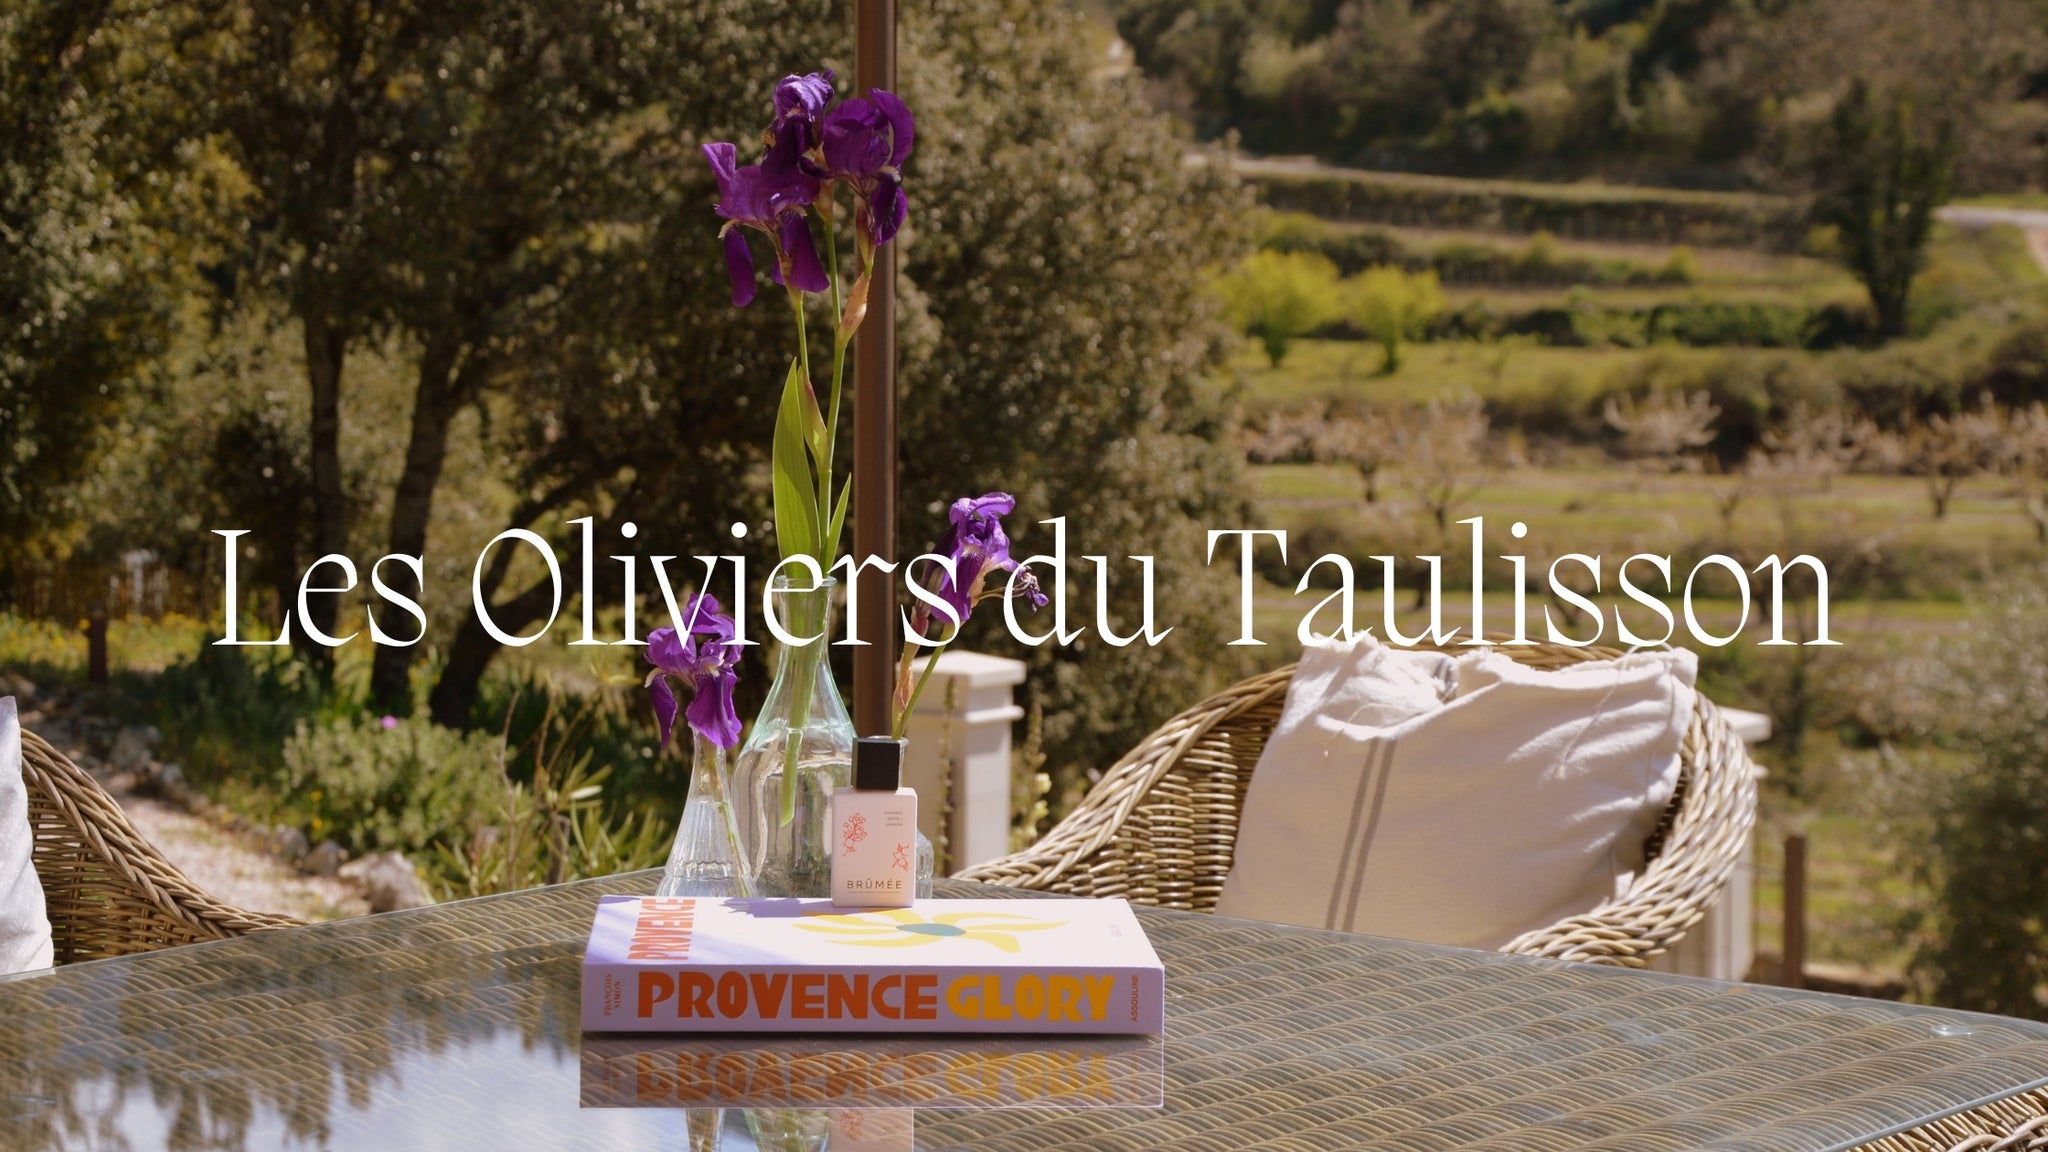 image of les Oliviers du Taulisson with the name written on it